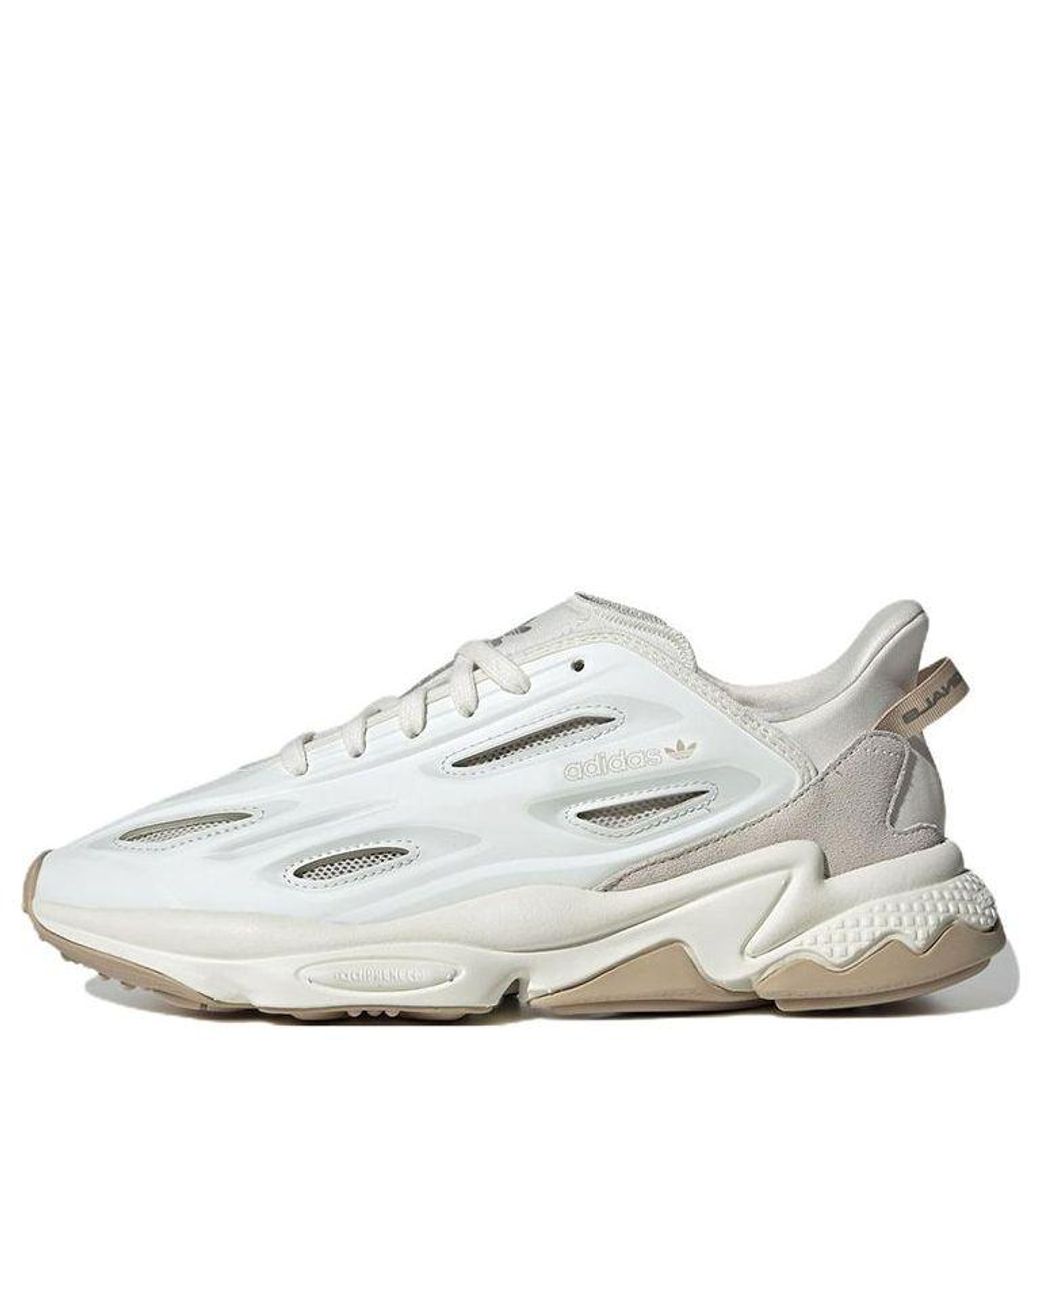 adidas Originals Ozweego Celox Shoes 'off White Pale Nude' for Men | Lyst